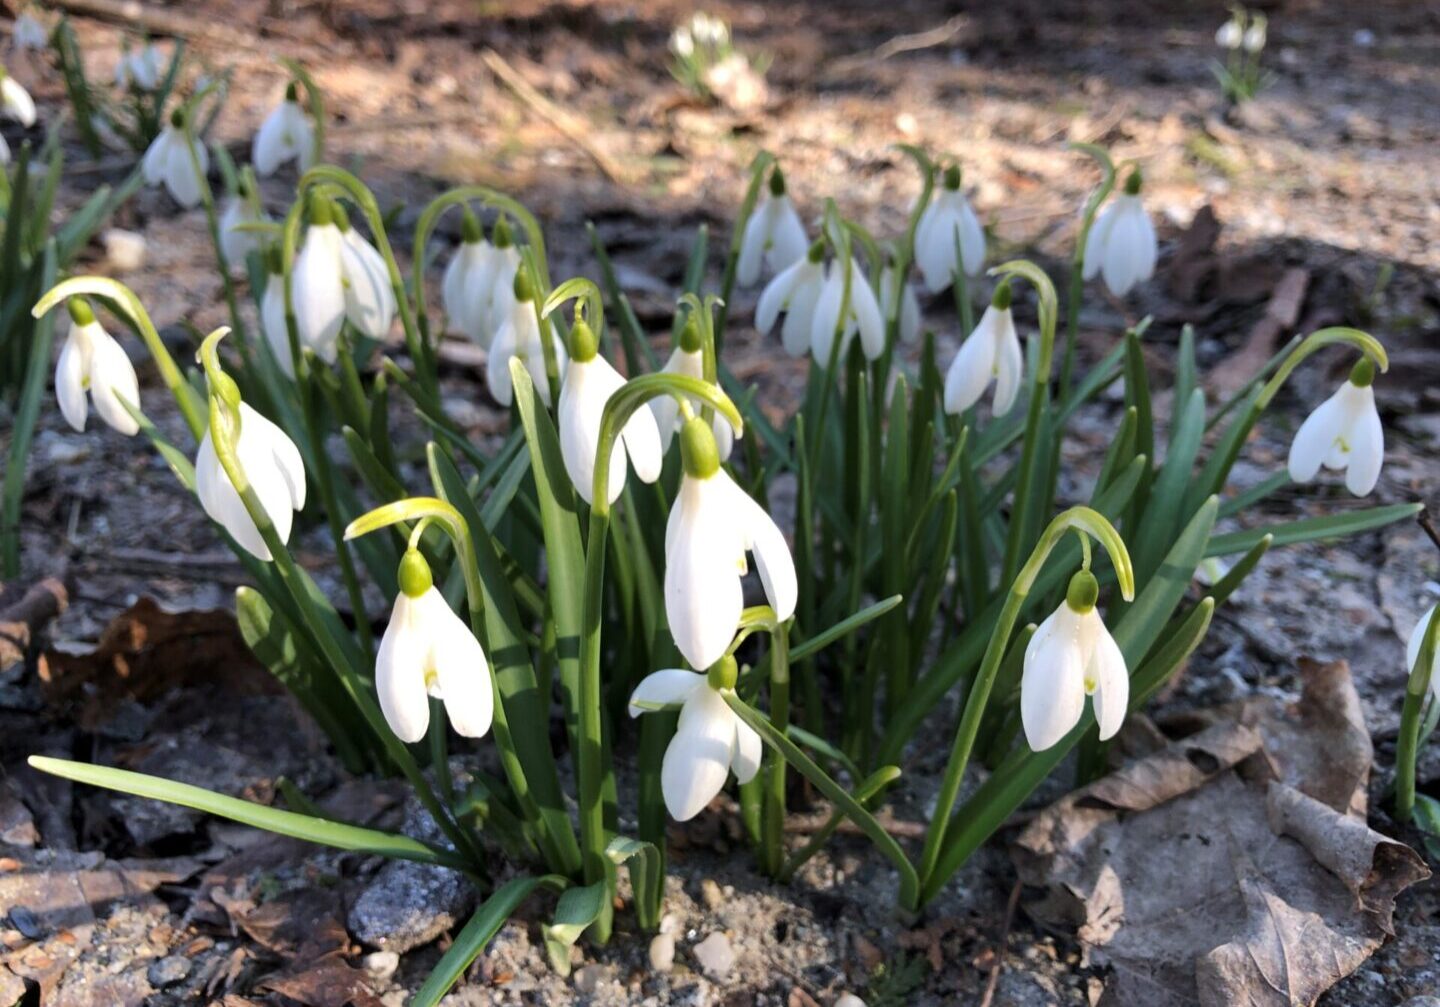 A group of snowdrops growing in the dirt.